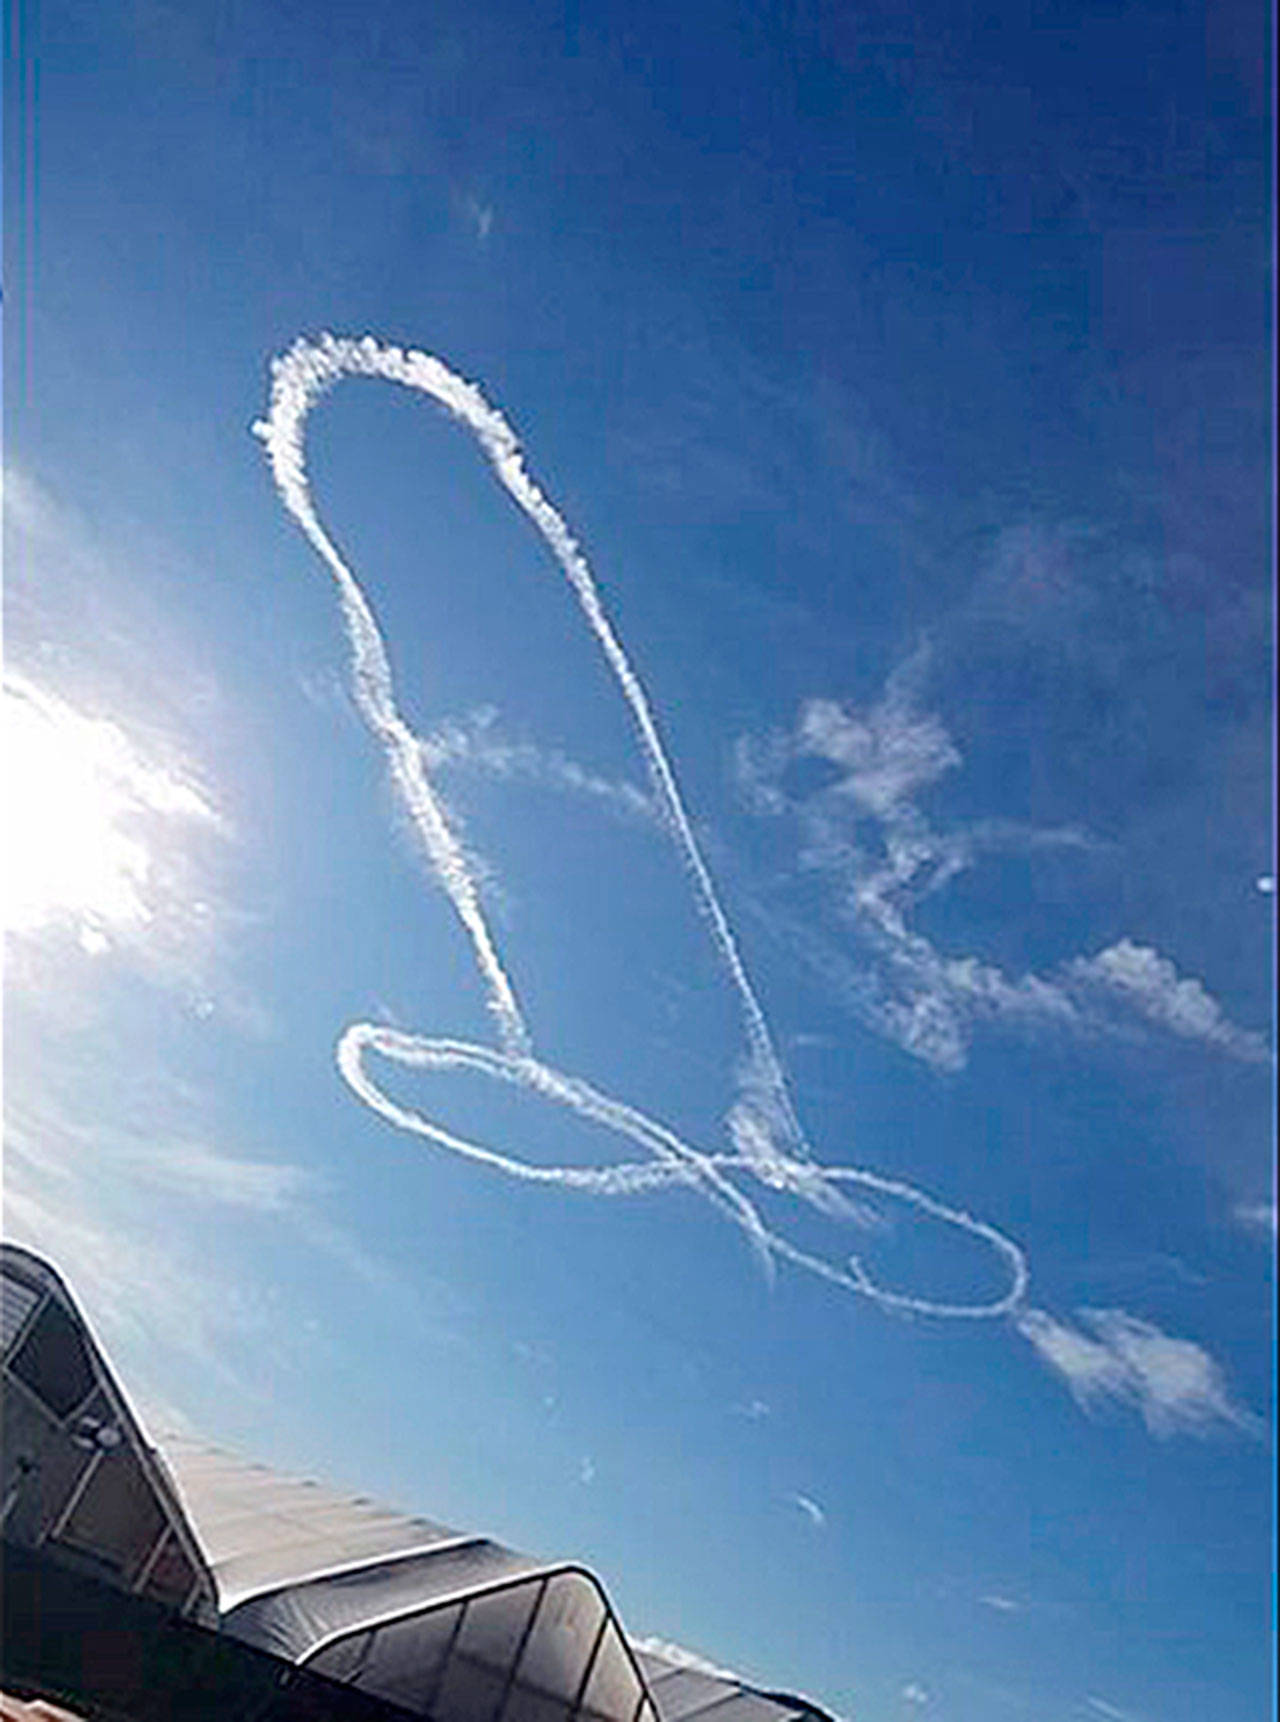 As published in the Spokesman Review — A Growler based on Whidbey caused a stir in Okanogan after it drew a phallic shape in the sky Thursday.